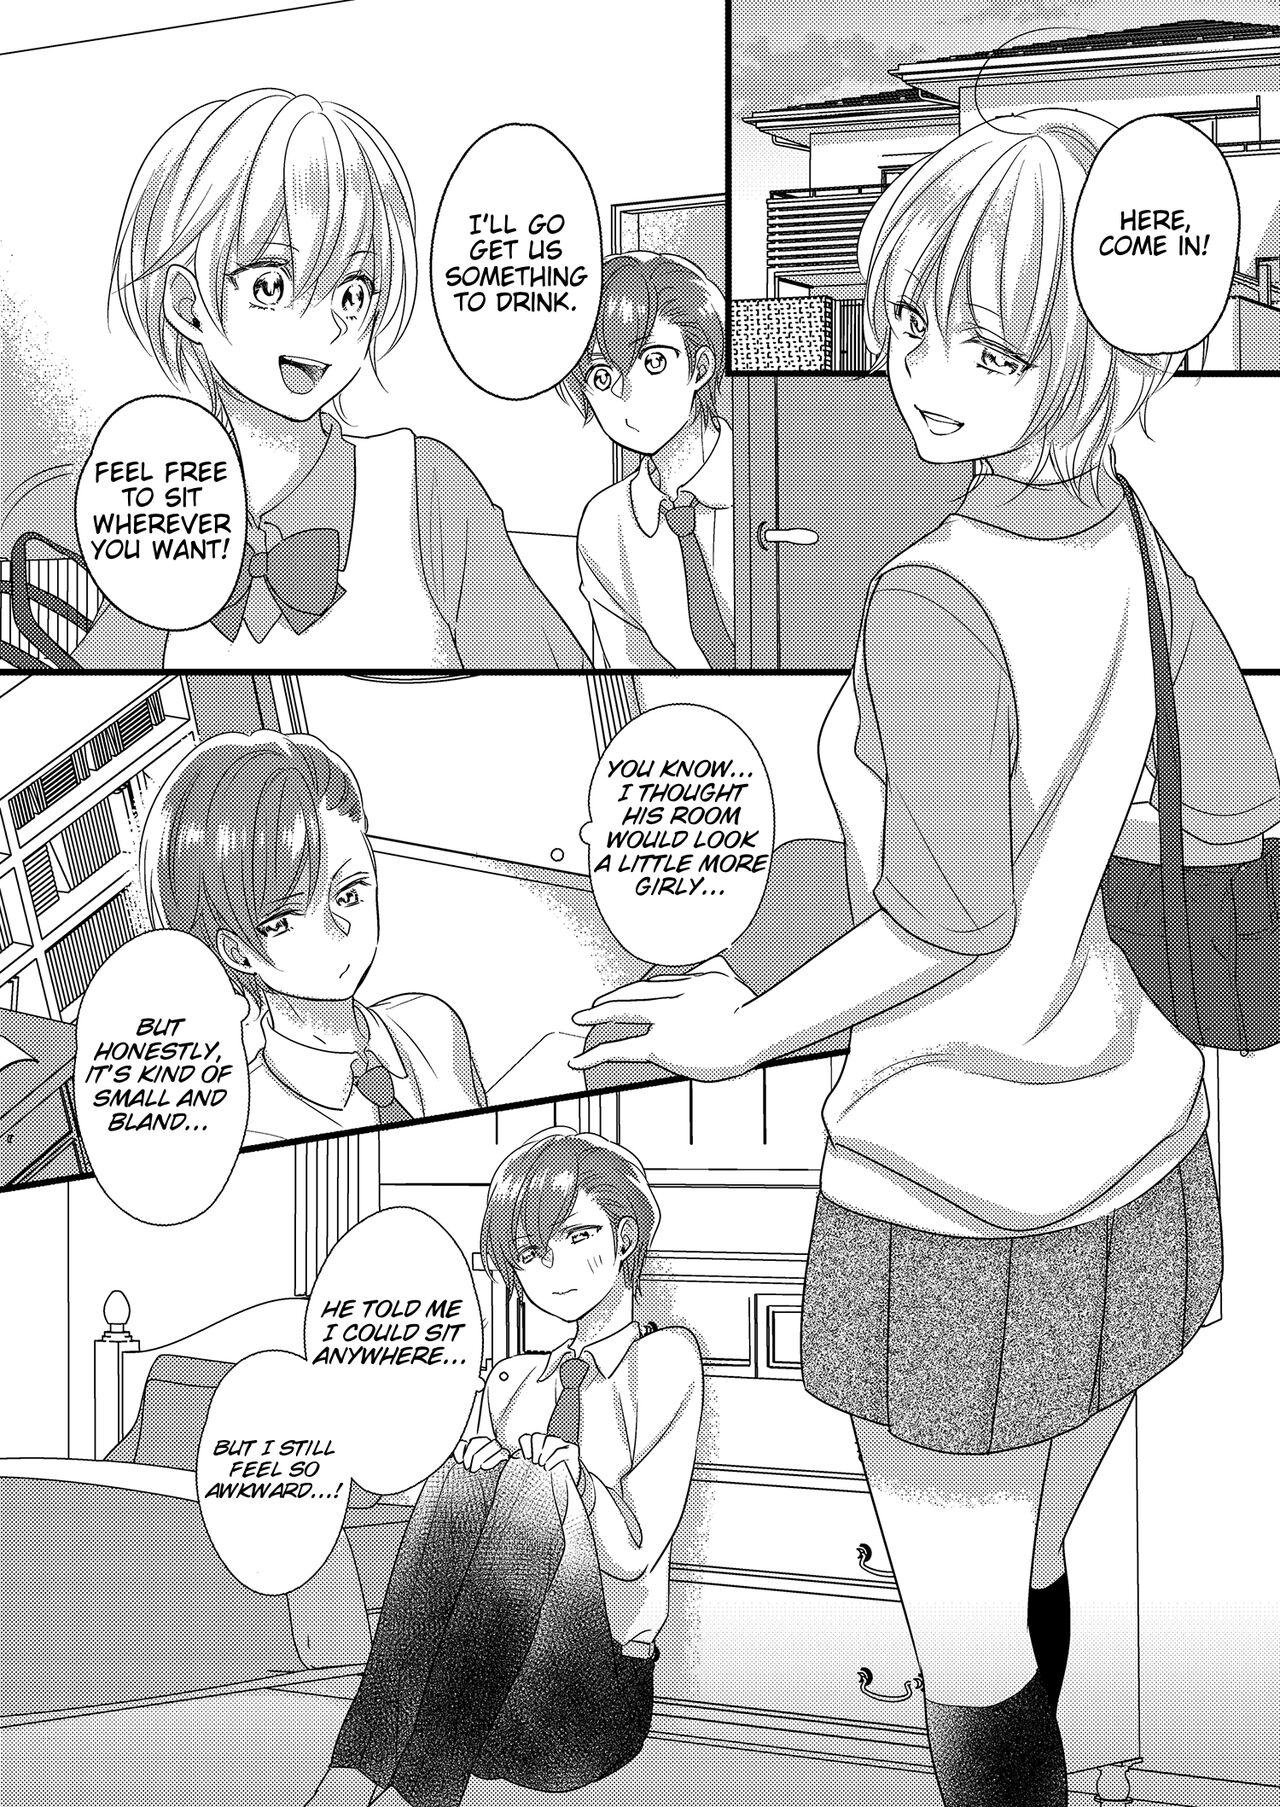 Wet Pussy Haru and Sana ～Love Connected Through Cosplay～ - Original Parody - Page 9